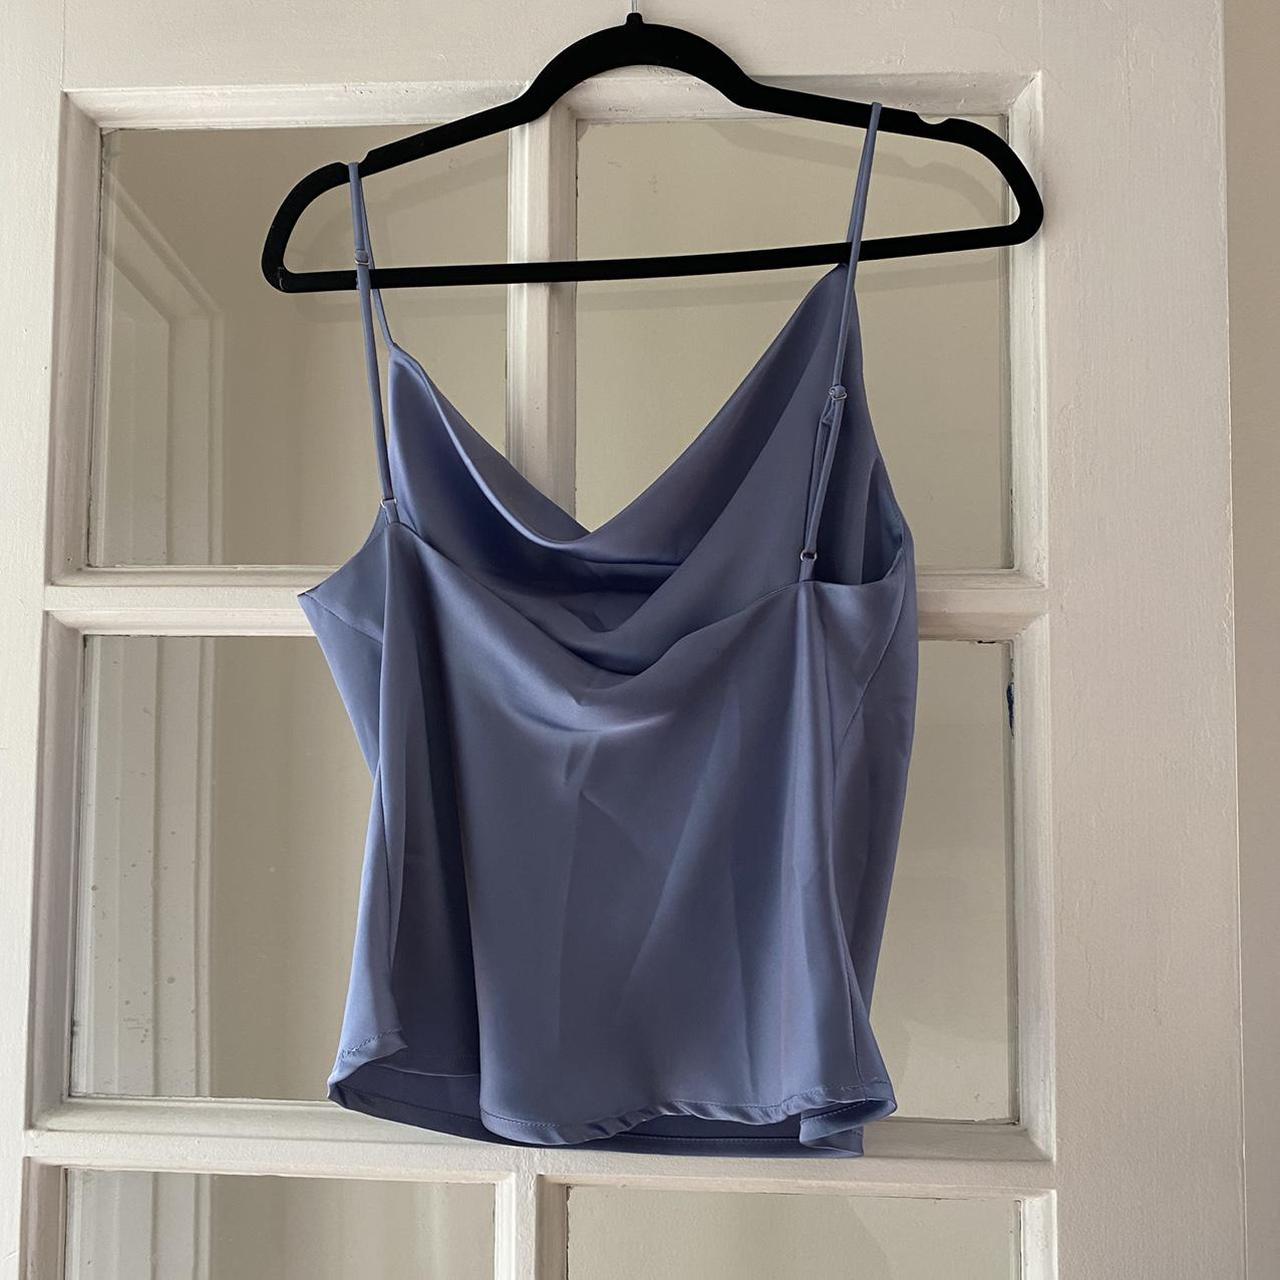 Satin cowl neck top. In excellent condition, worn a... - Depop